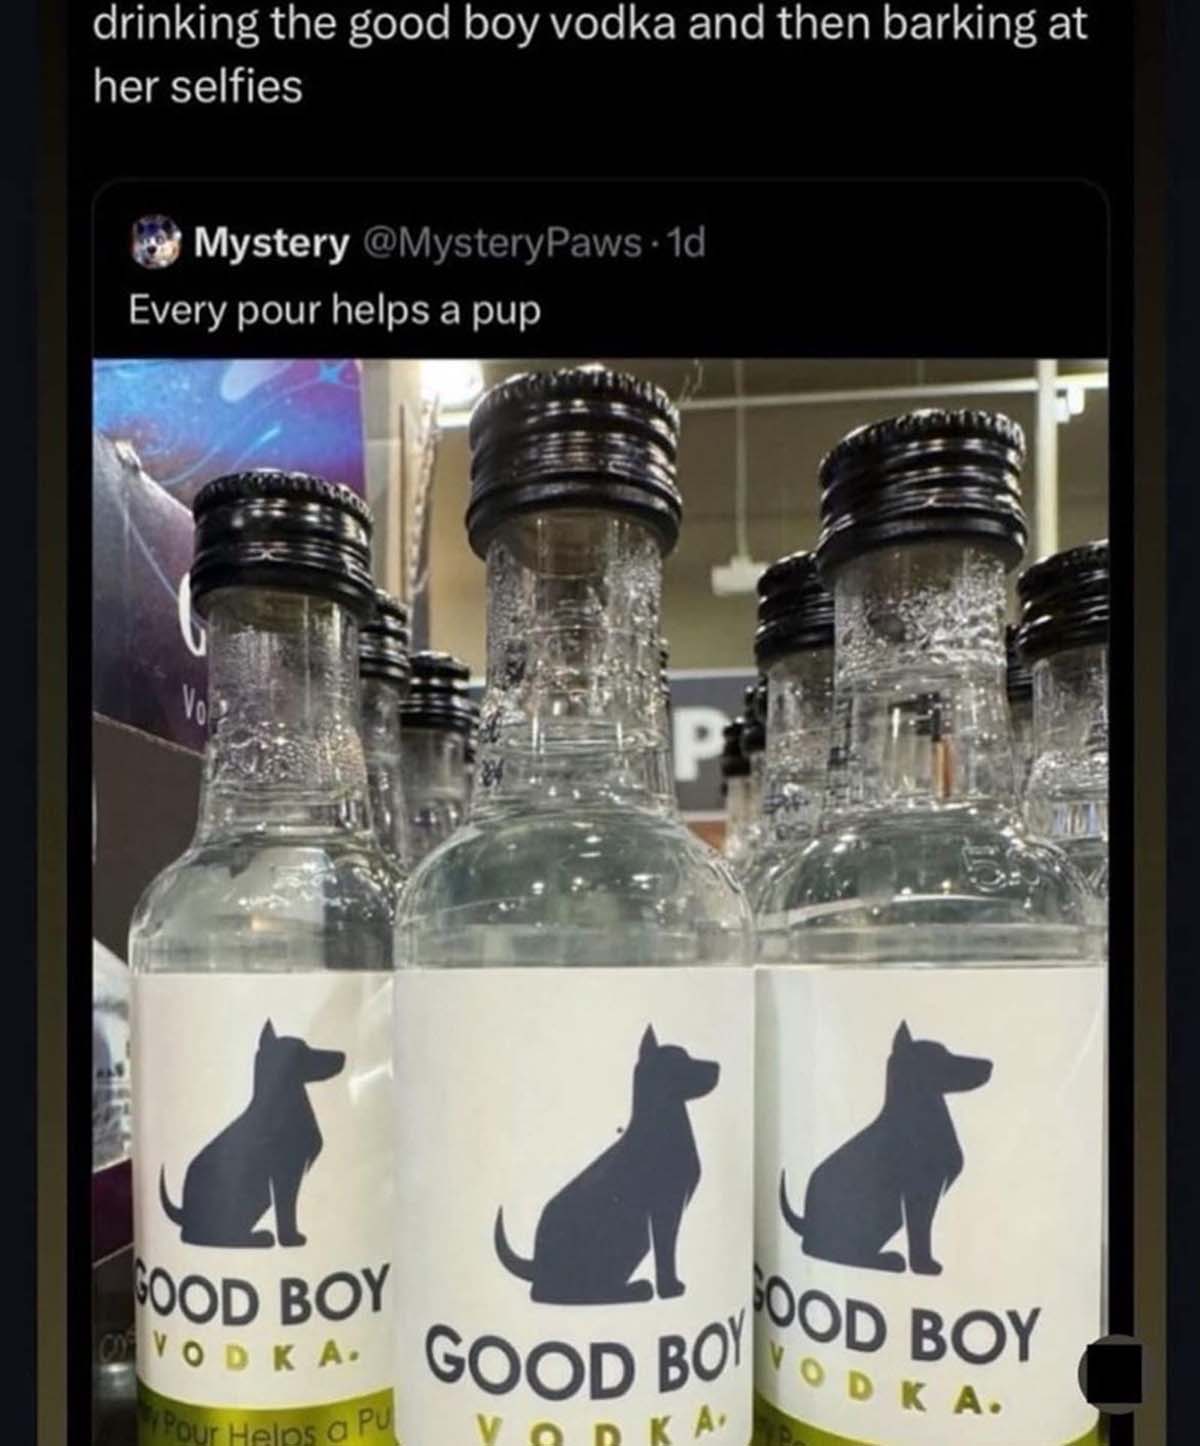 glass bottle - drinking the good boy vodka and then barking at her selfies Mystery Paws. 1d Every pour helps a pup Vo P Good Boy Yod Ka Good Boy Pour Helps a Pu Vorka Ood Boy Vodka.